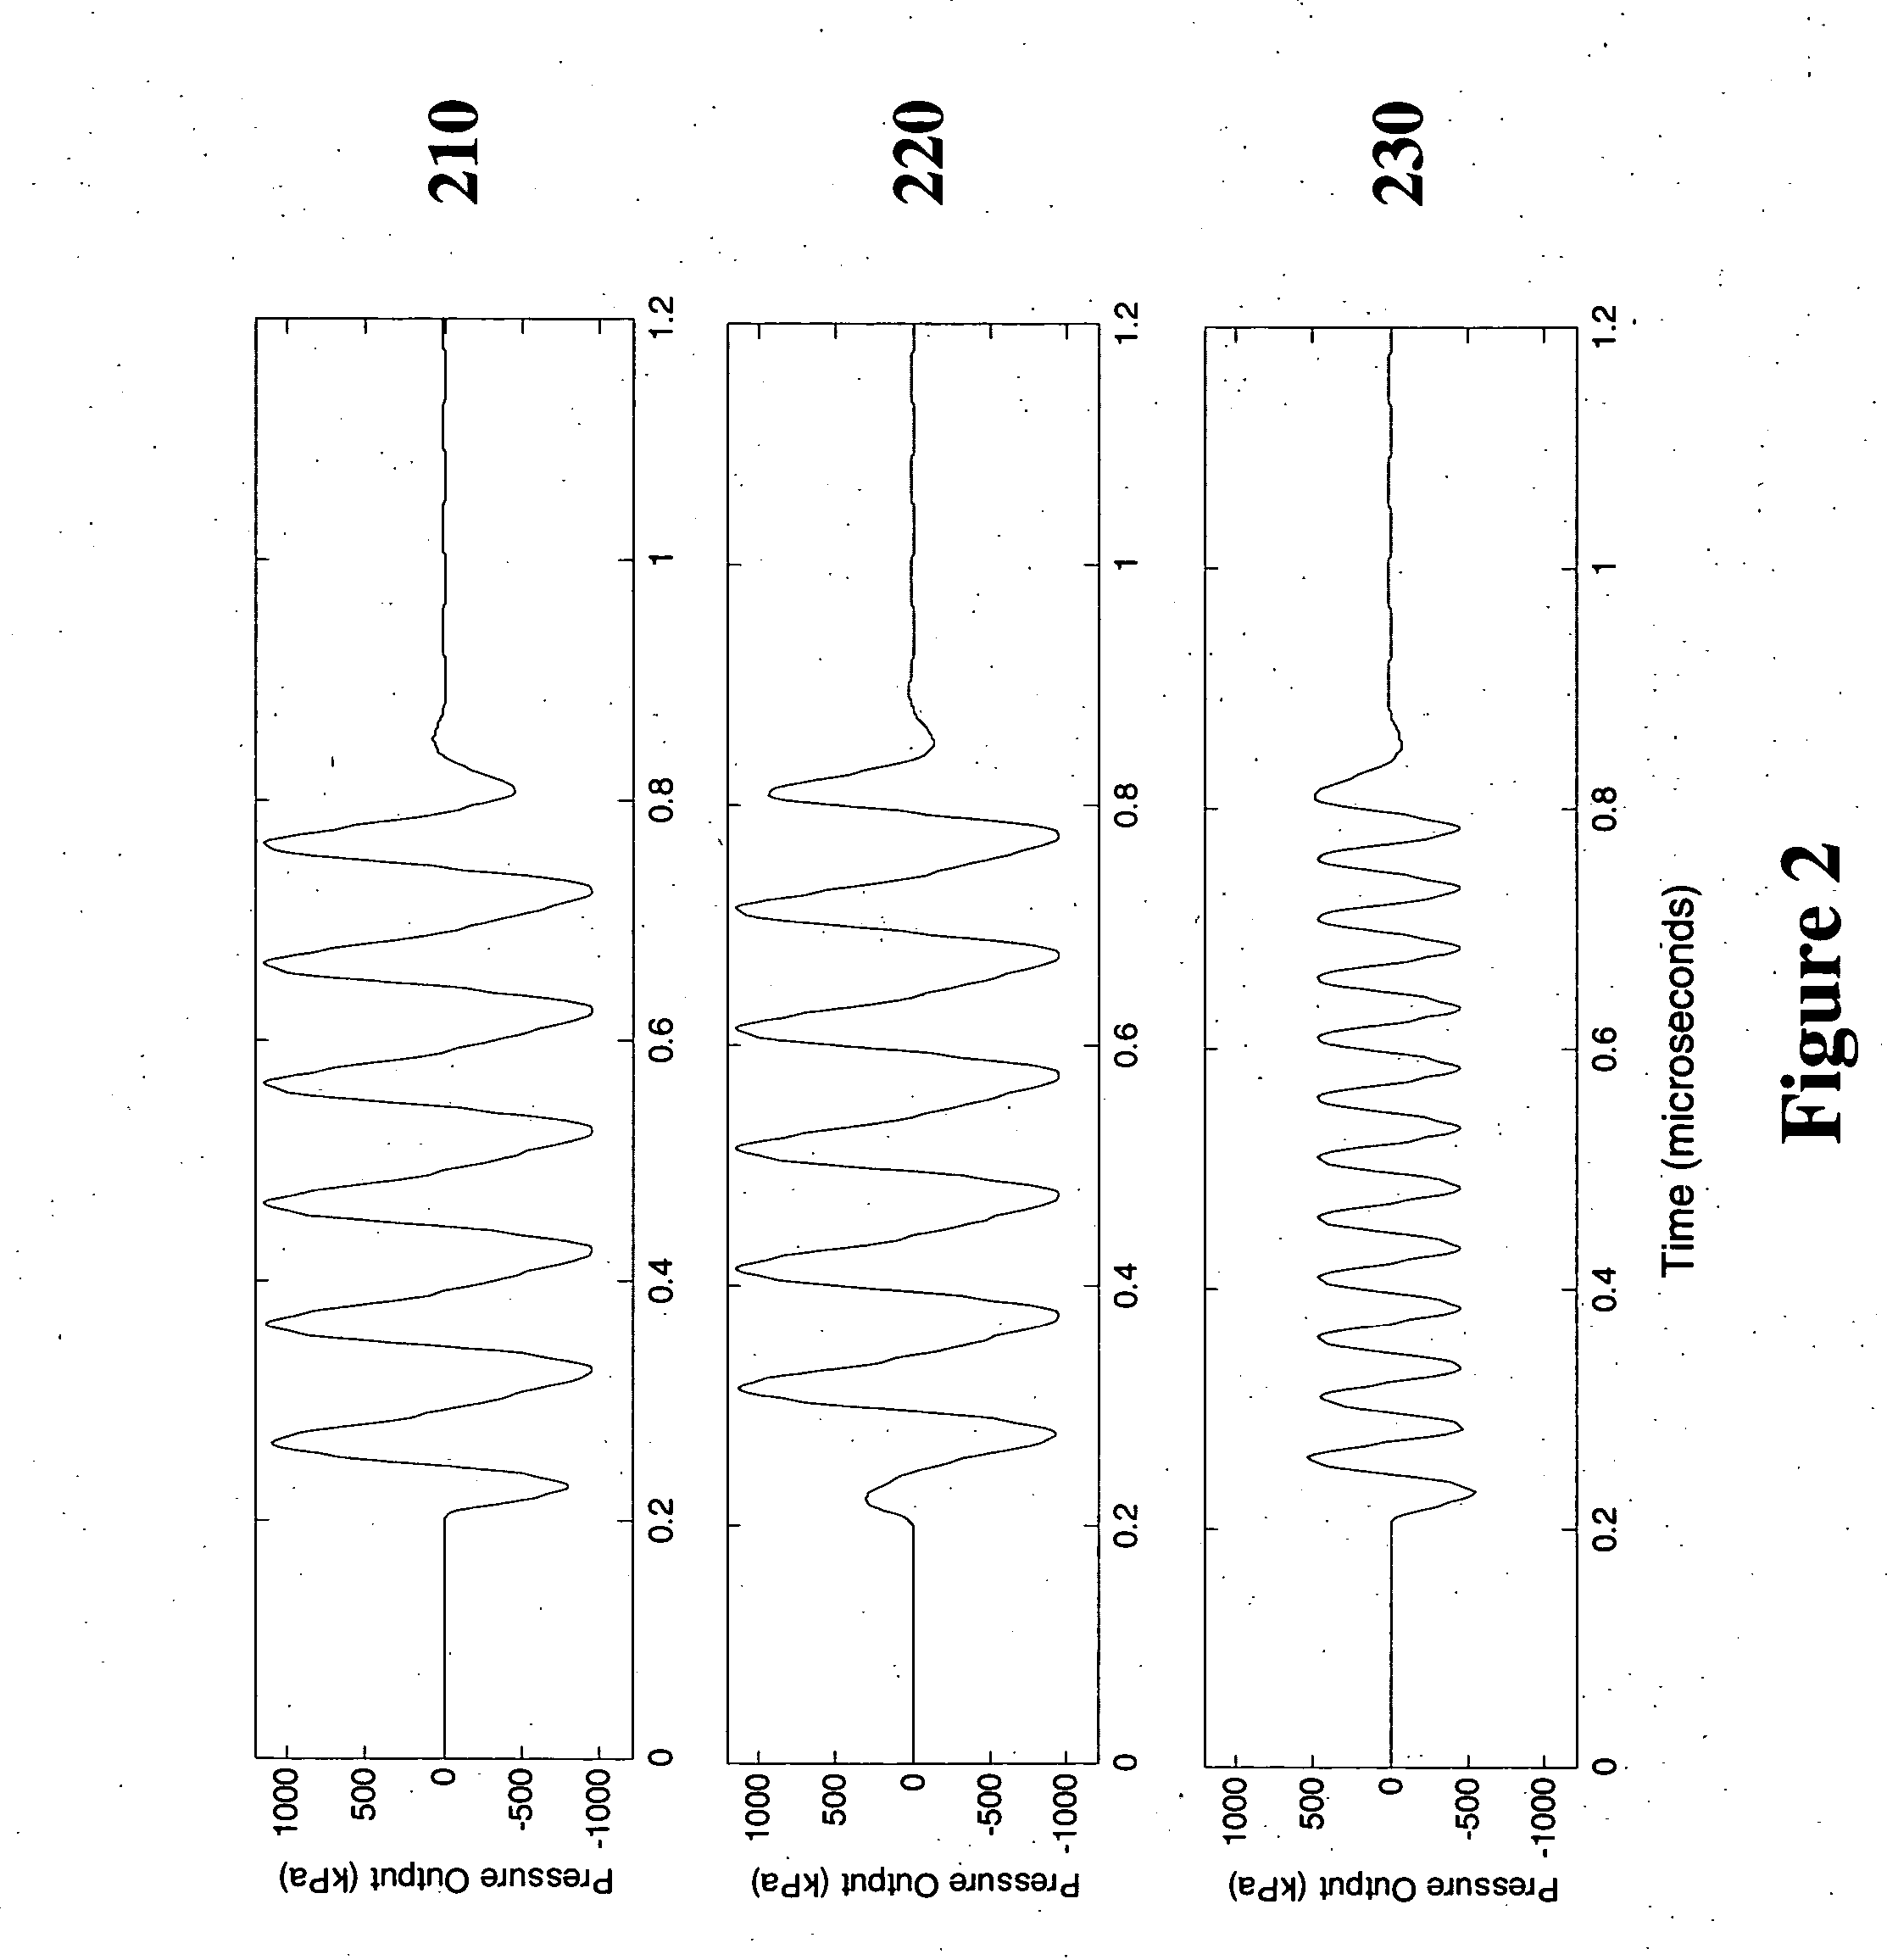 Method and apparatus for improving the performance of capacitive acoustic transducers using bias polarity control and multiple firings